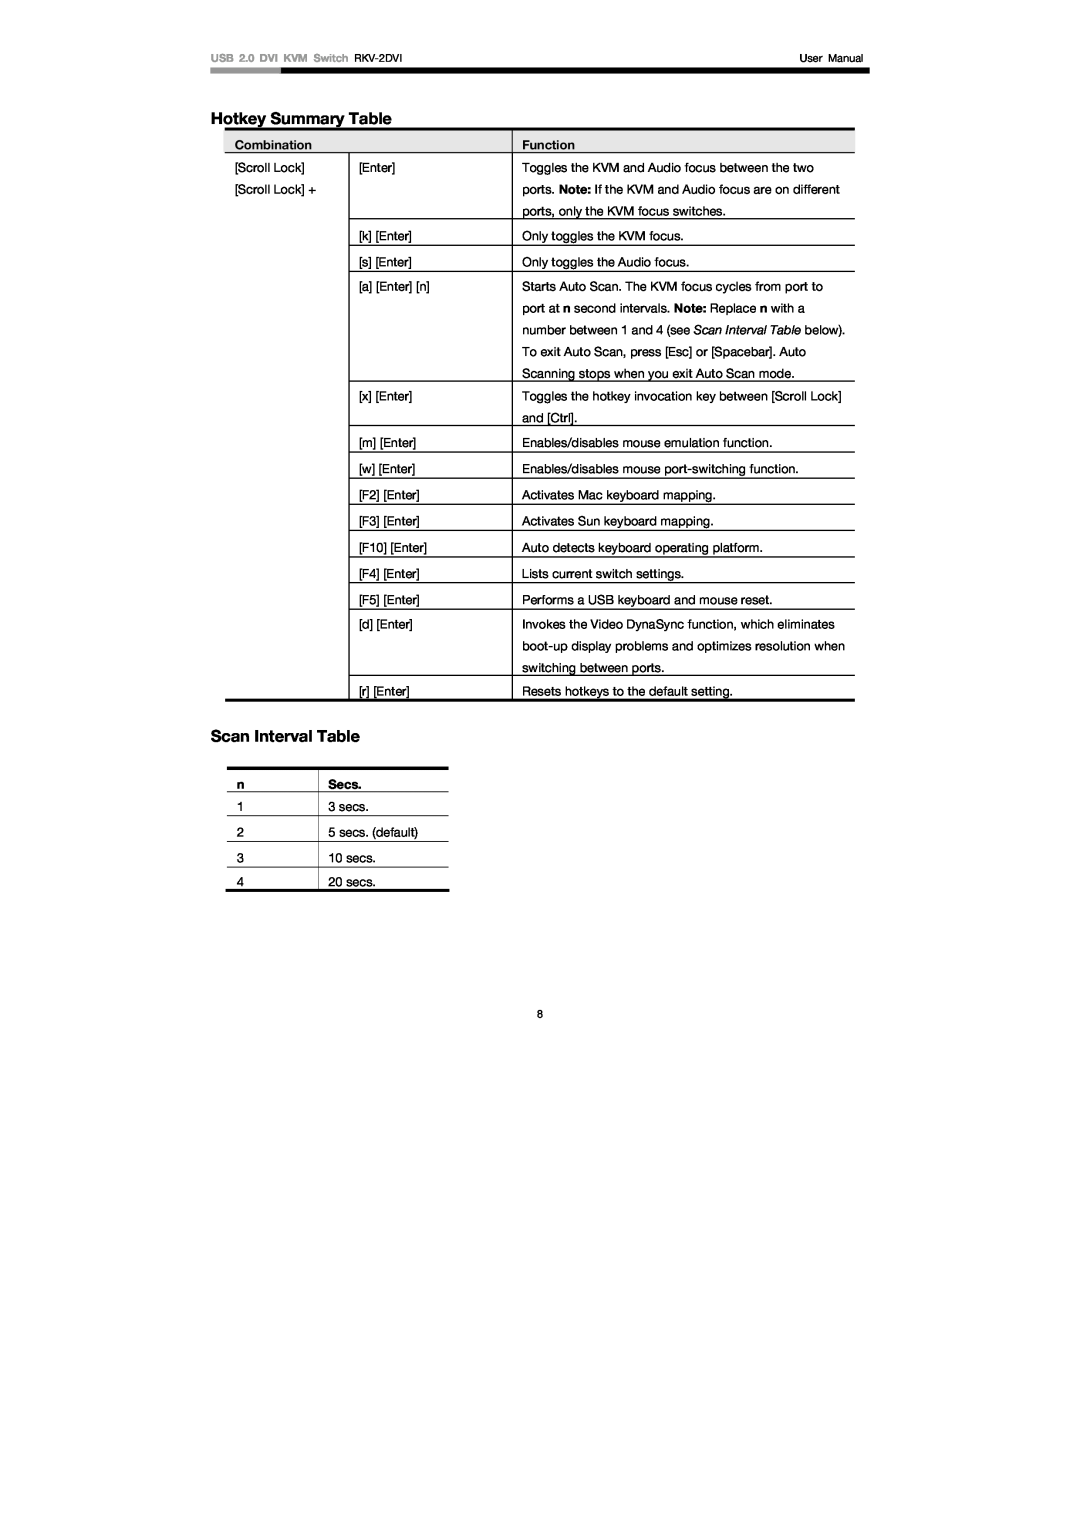 Rosewill RKV-2DVI user manual Hotkey Summary Table, Scan Interval Table, Combination, Function, Secs 